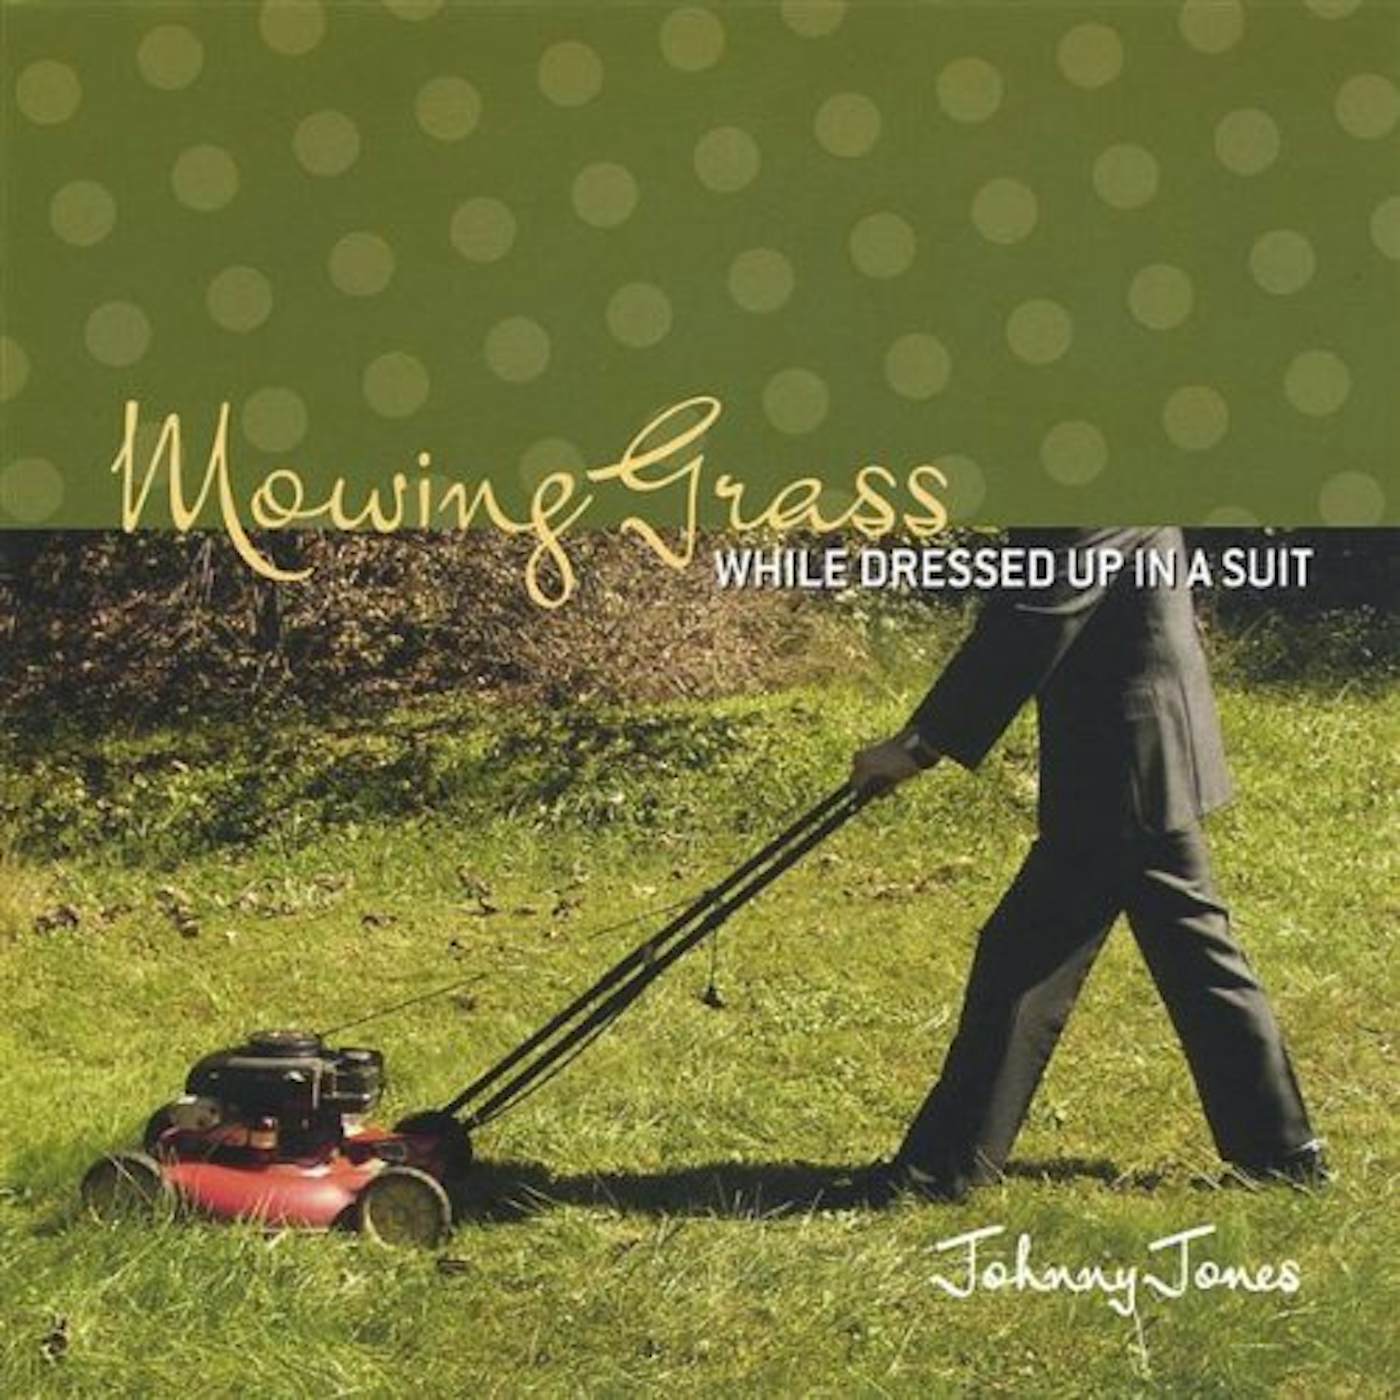 Johnny Jones MOWING GRASS WHILE DRESSED UP IN A SUIT CD